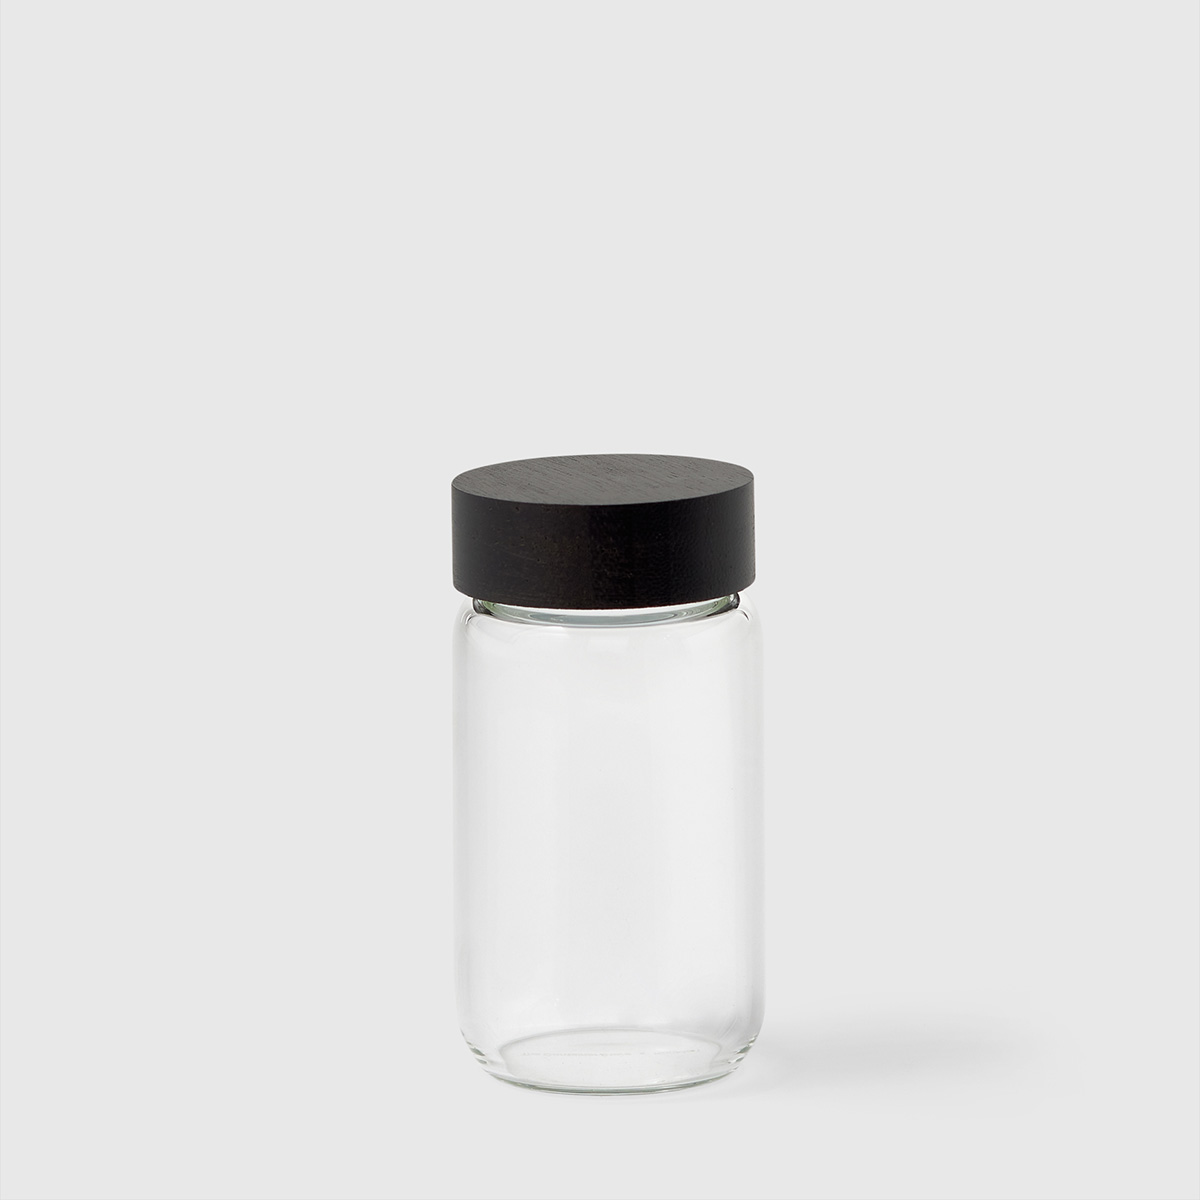 https://www.containerstore.com/catalogimages/441435/10086601_Kon_Mari_small_glass_spice_.jpg